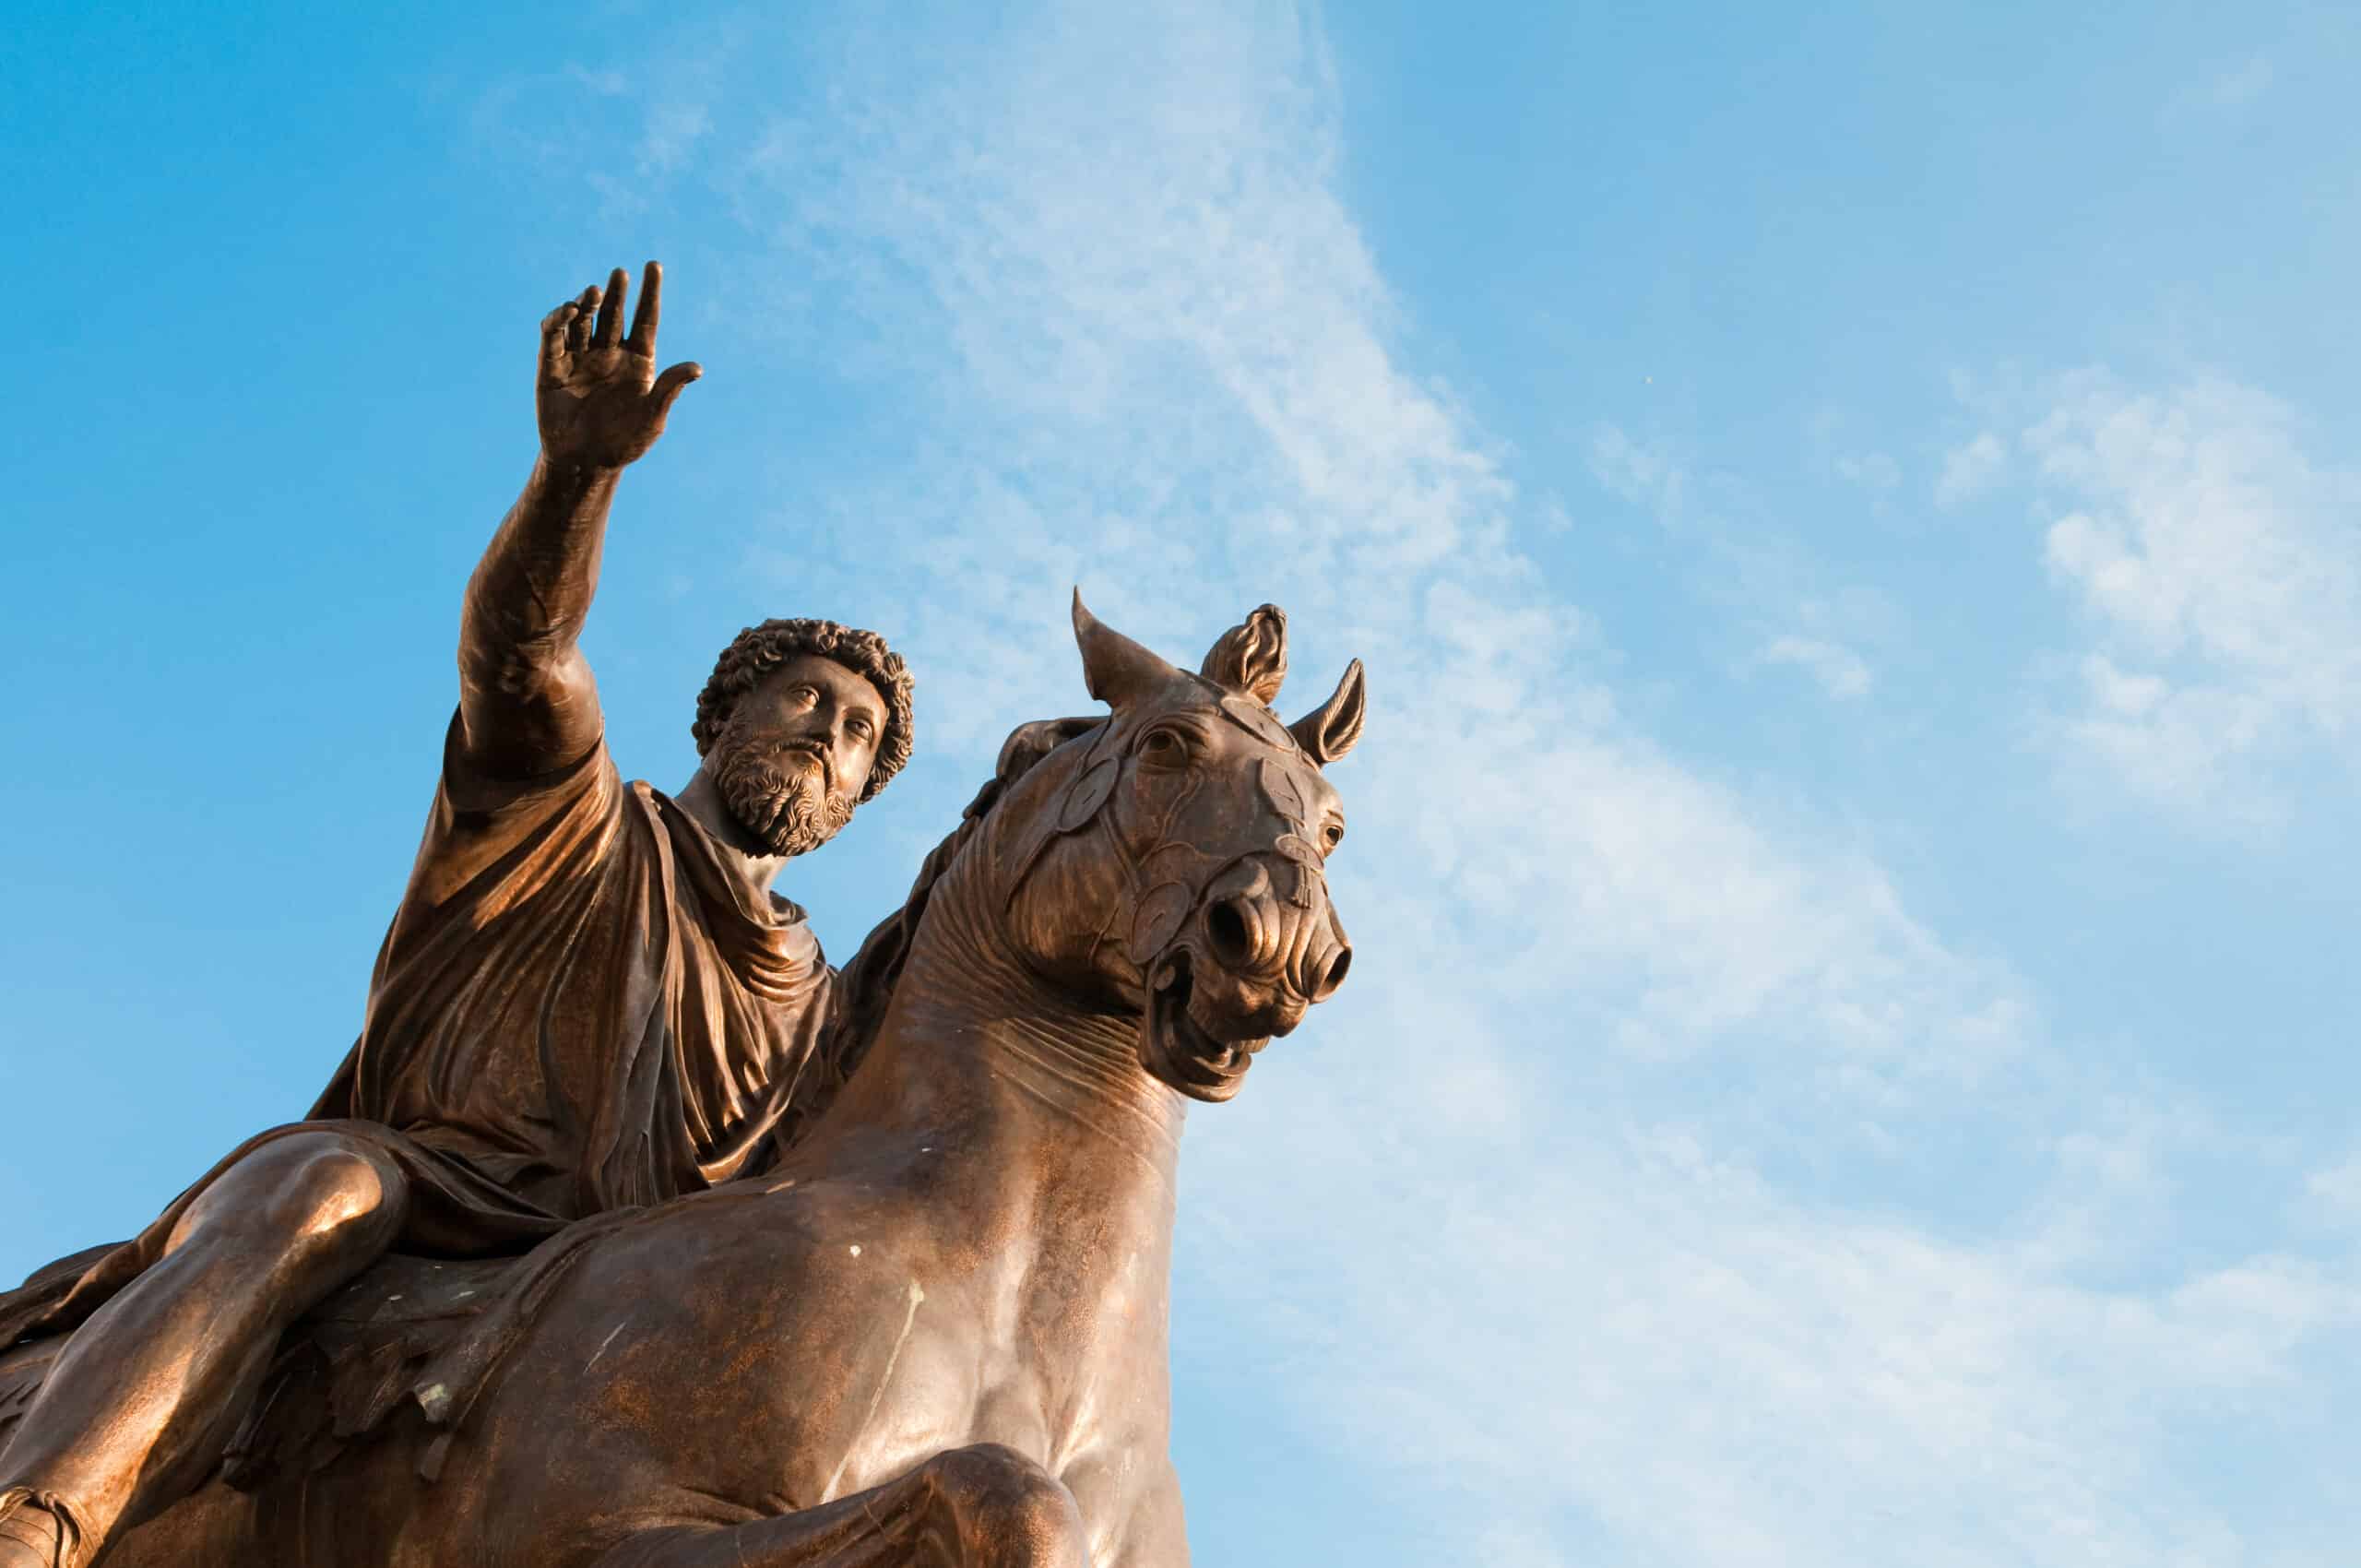 50 Stoicism Quotes: Tackle Anything With the Power of These Words